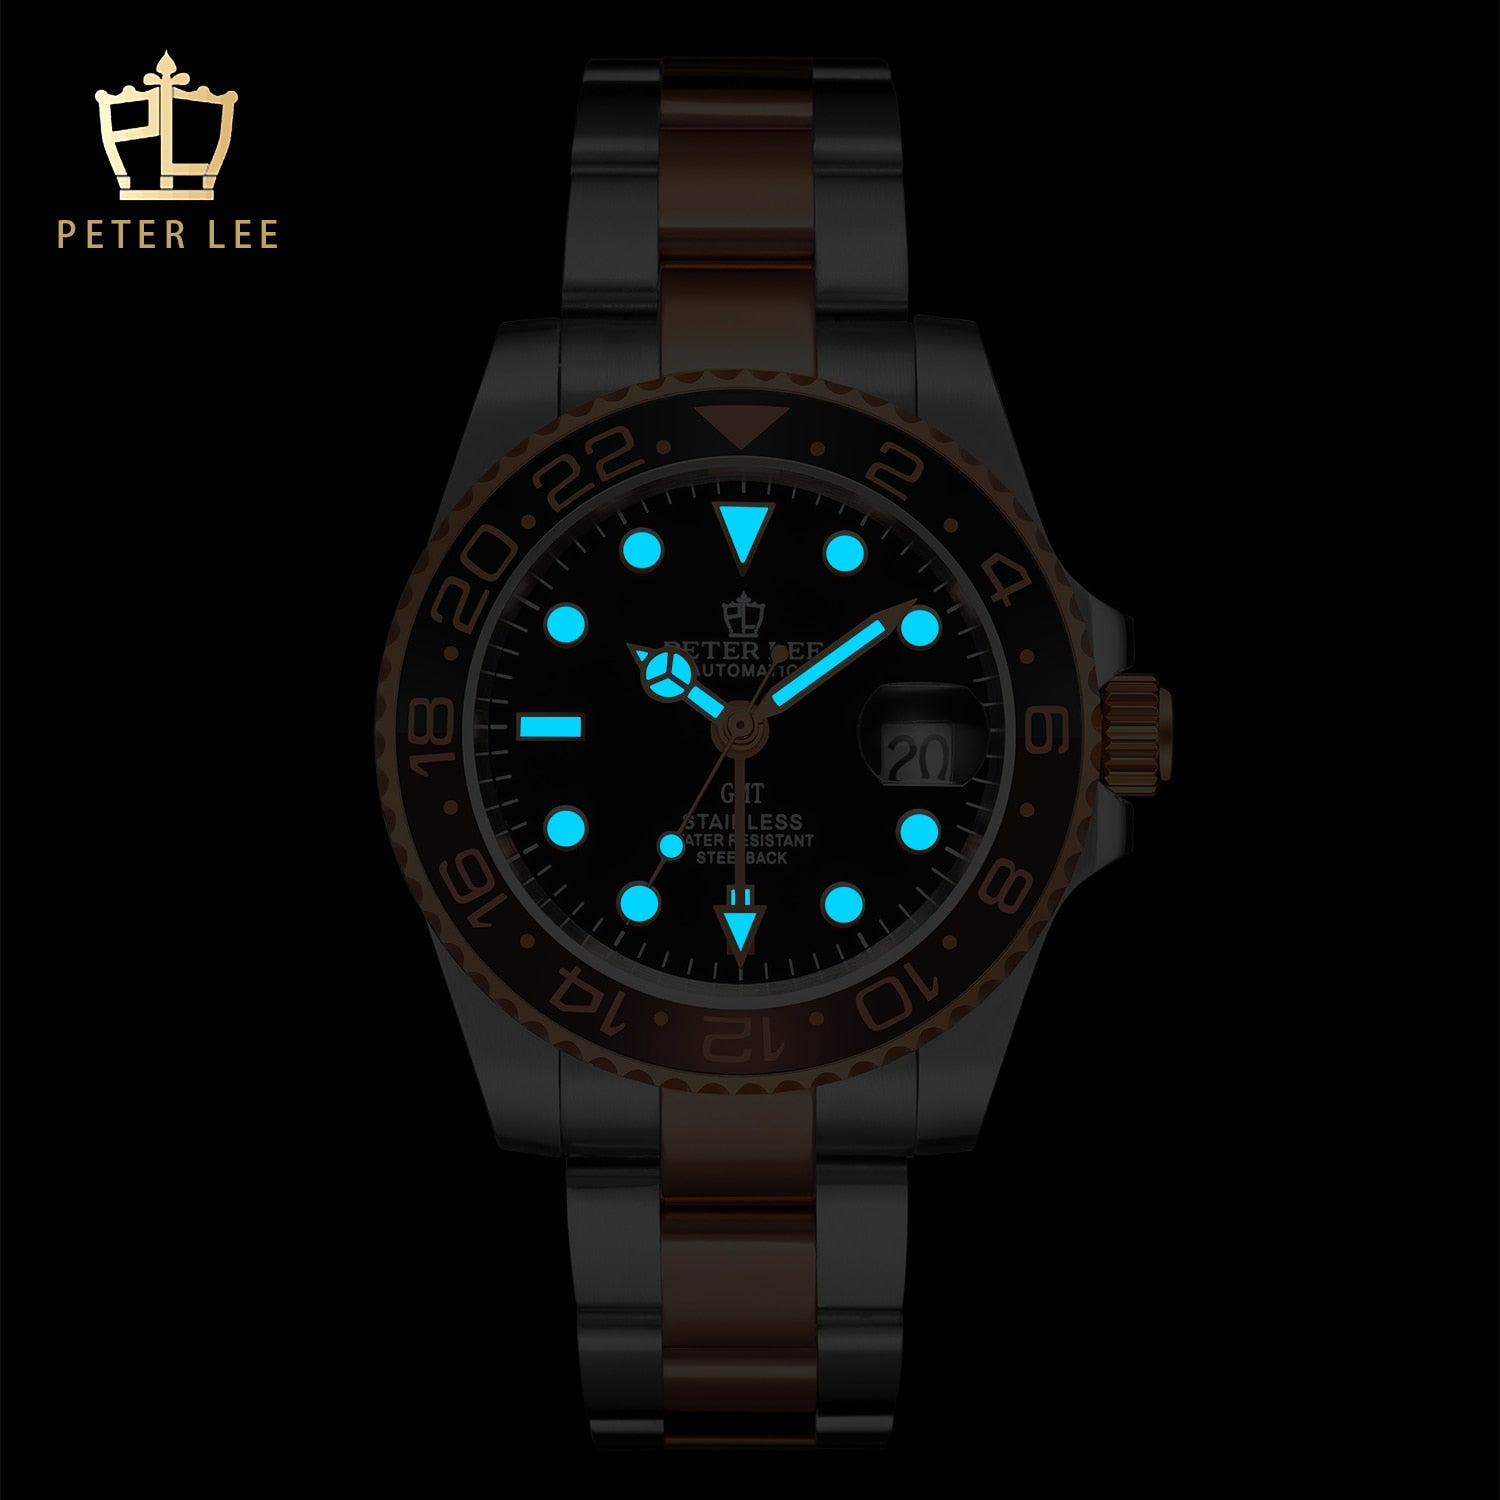 New Peter Lee Men Automatic Mechanical Watch Brand Bussine Luxury Steel Stainless Watches Auto Day GMT Wrist Watch Gifts